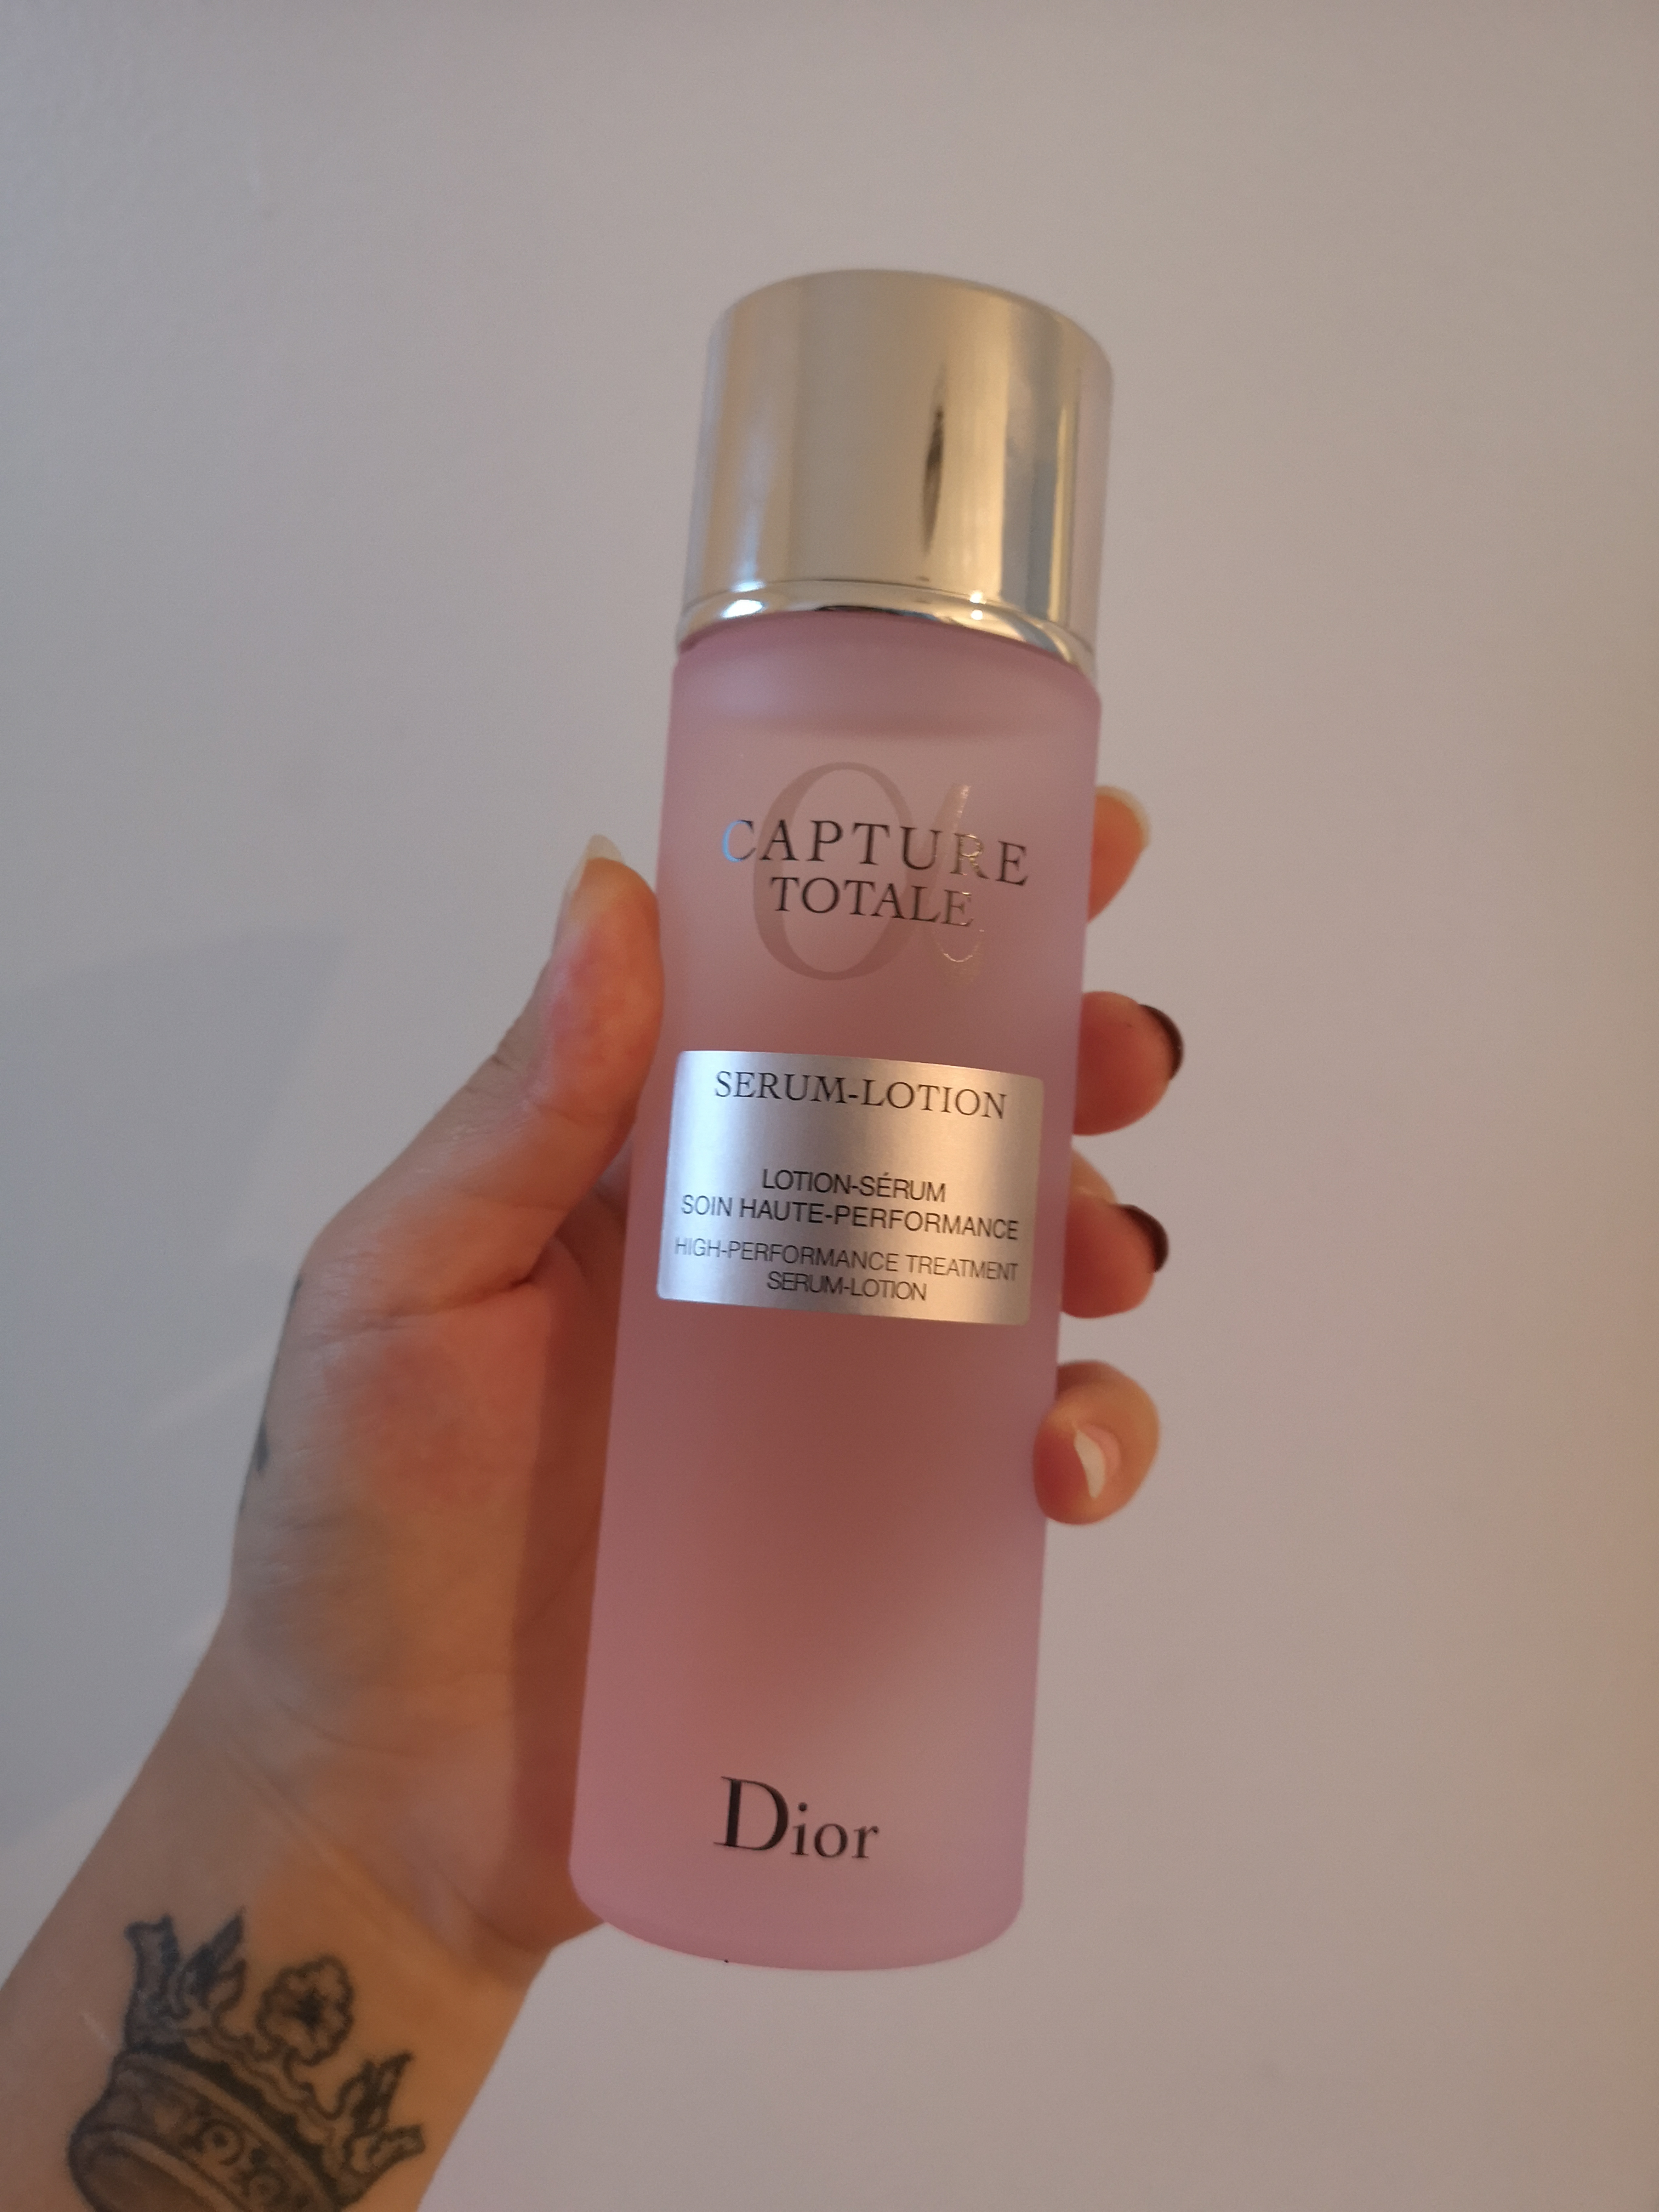 Dior Capture Totale Serum Lotion Review 